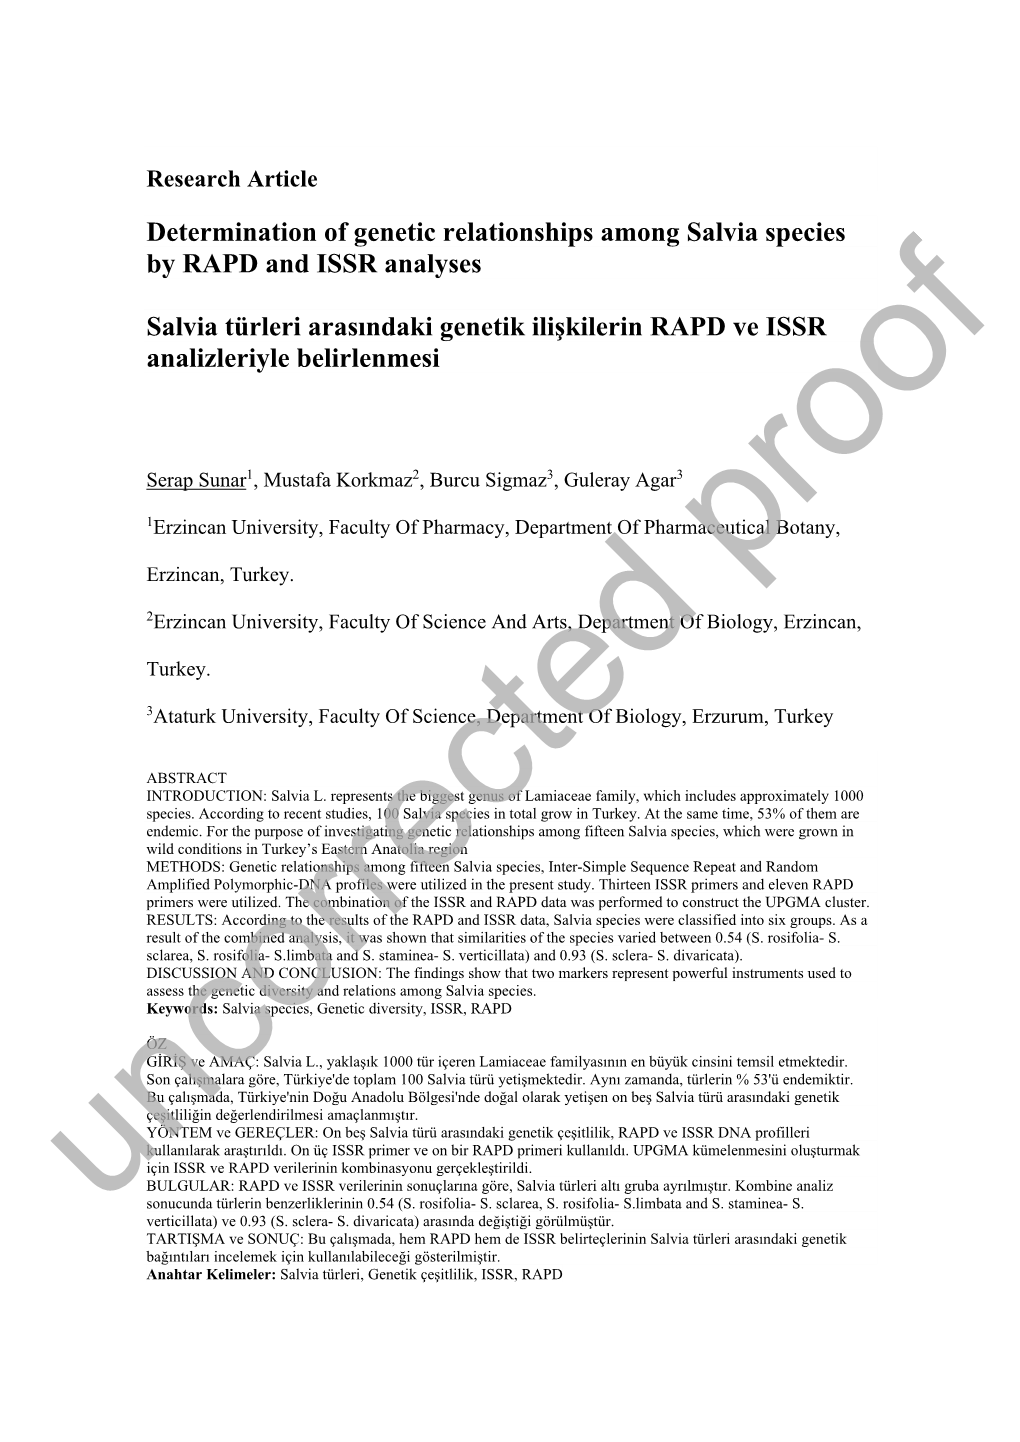 Determination of Genetic Relationships Among Salvia Species by RAPD and ISSR Analyses